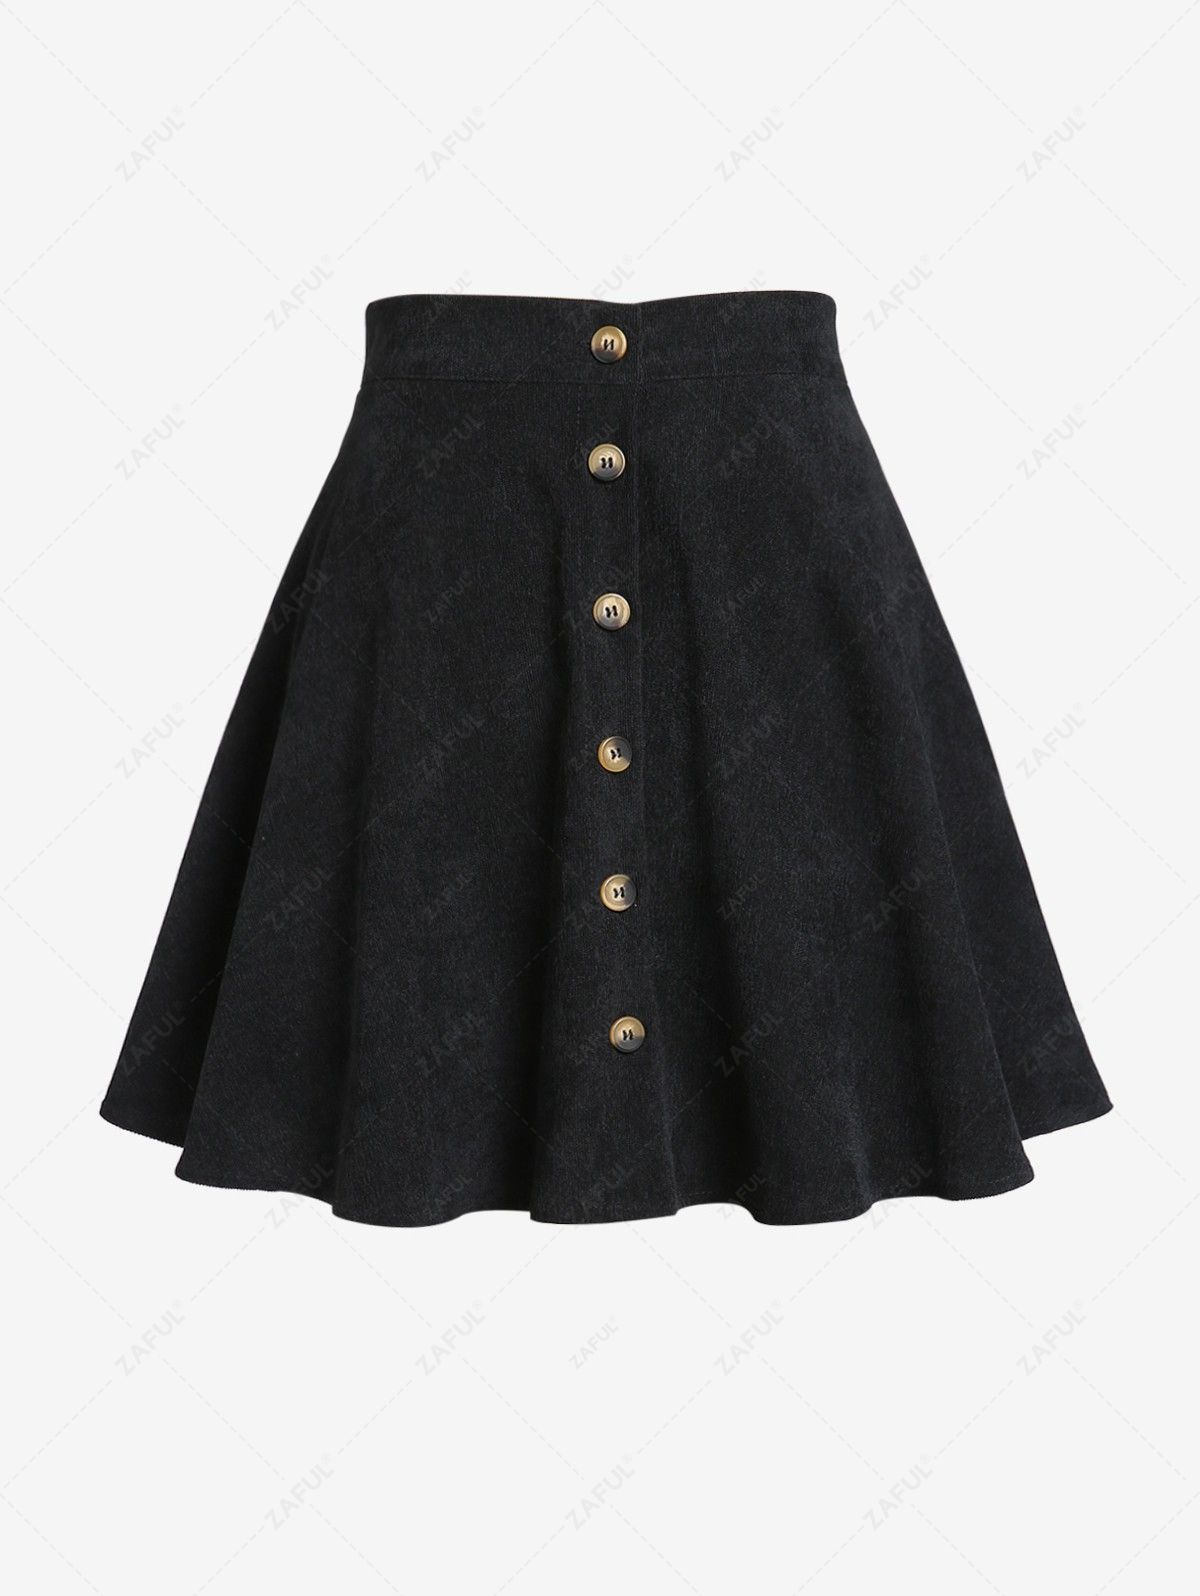   Zaful Women's Vintage Style Solid Color Button Up Corduroy Mini Skirt